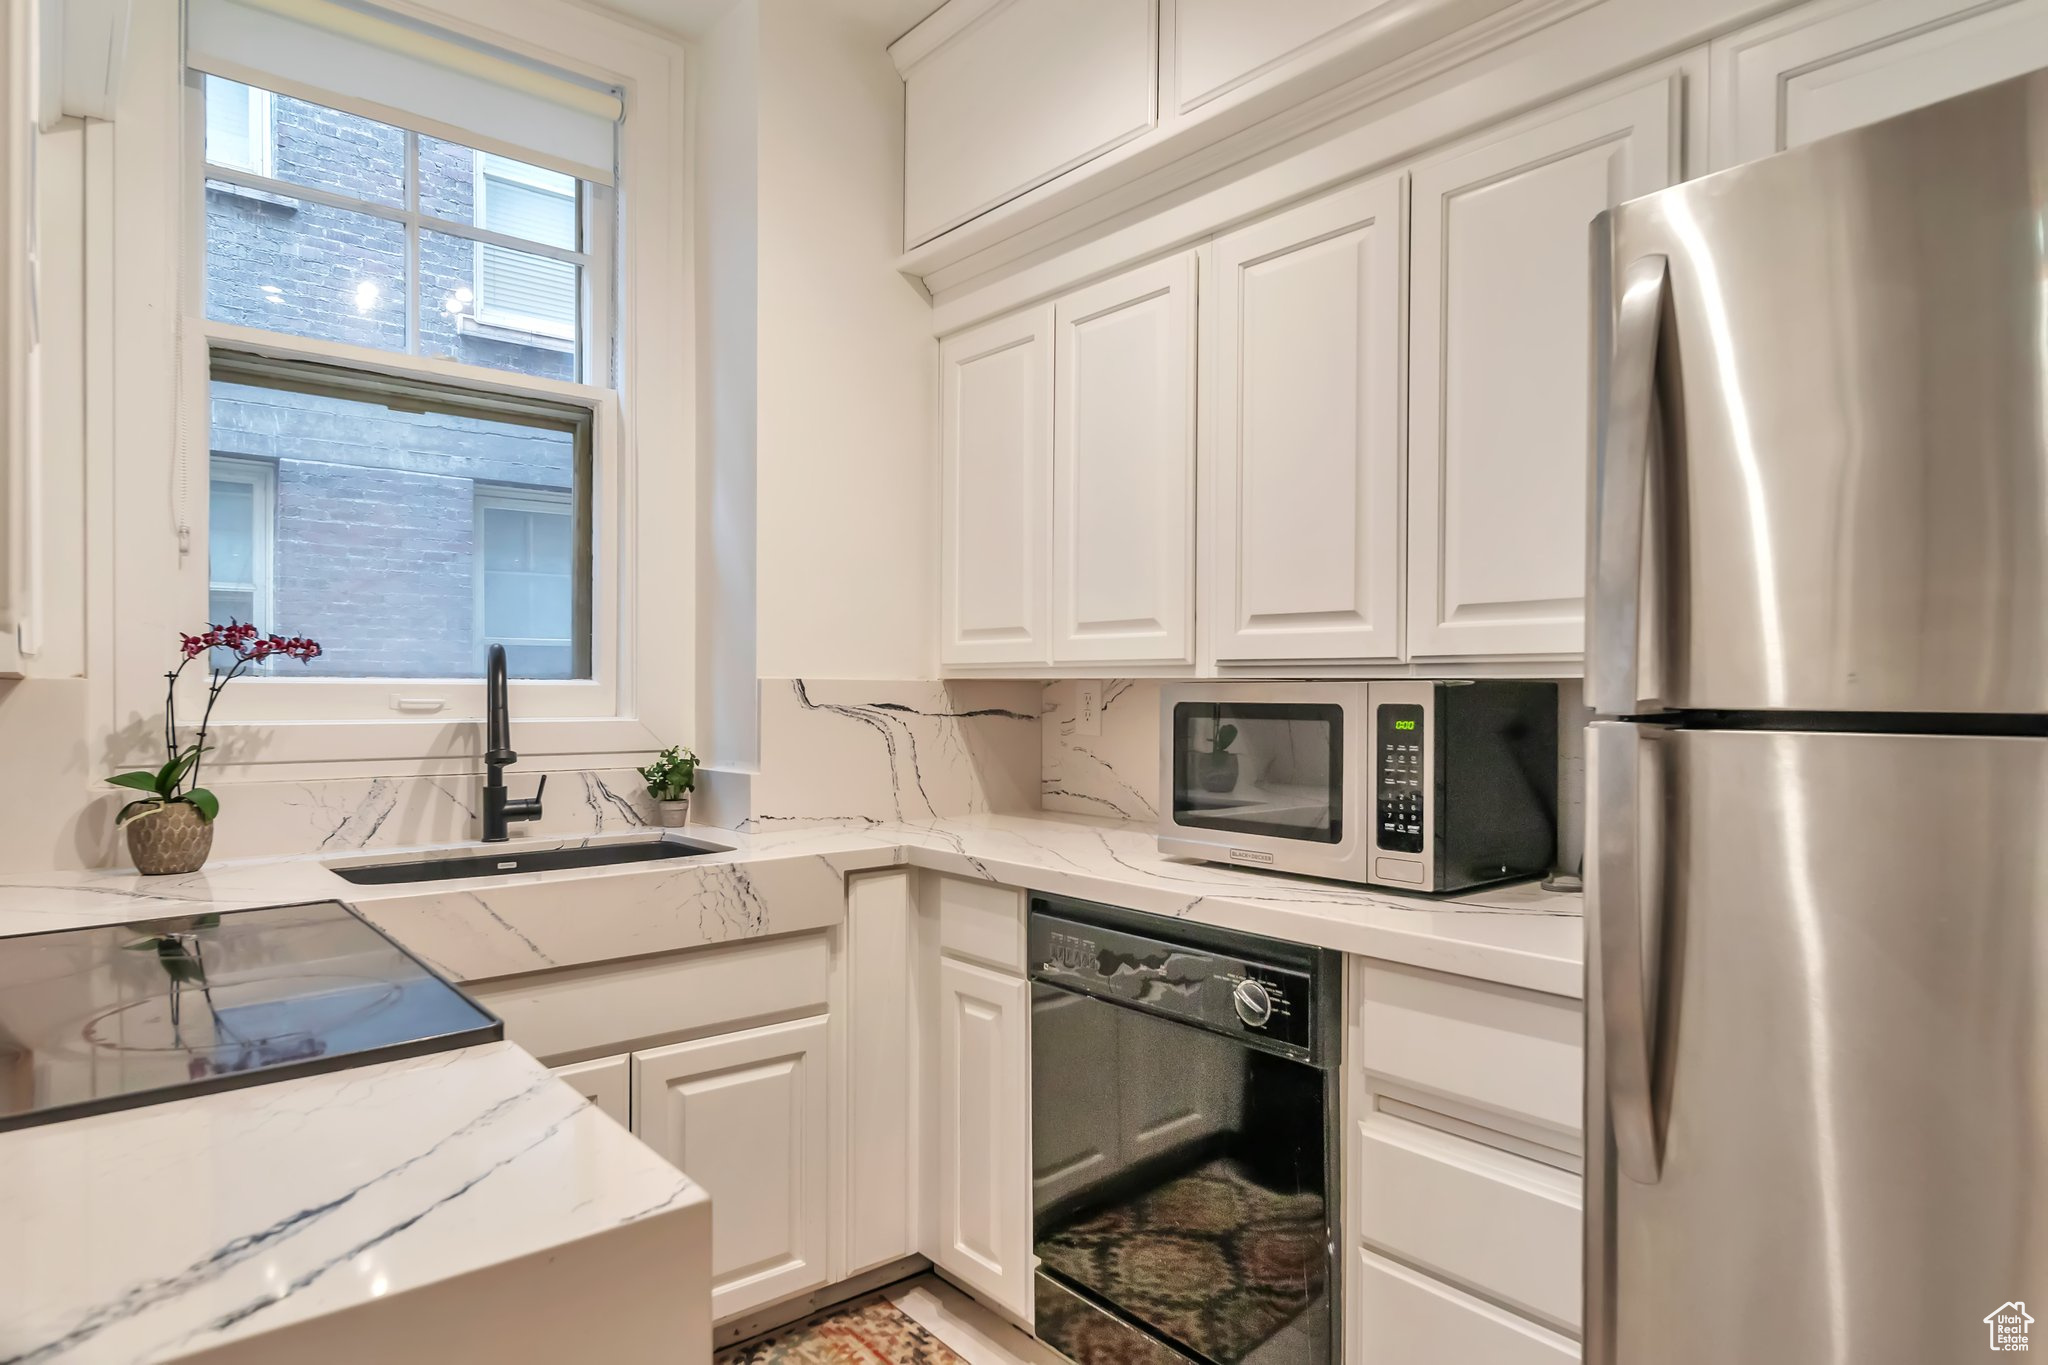 Kitchen with stainless steel fridge, dishwasher, light stone counters, white cabinetry, and sink